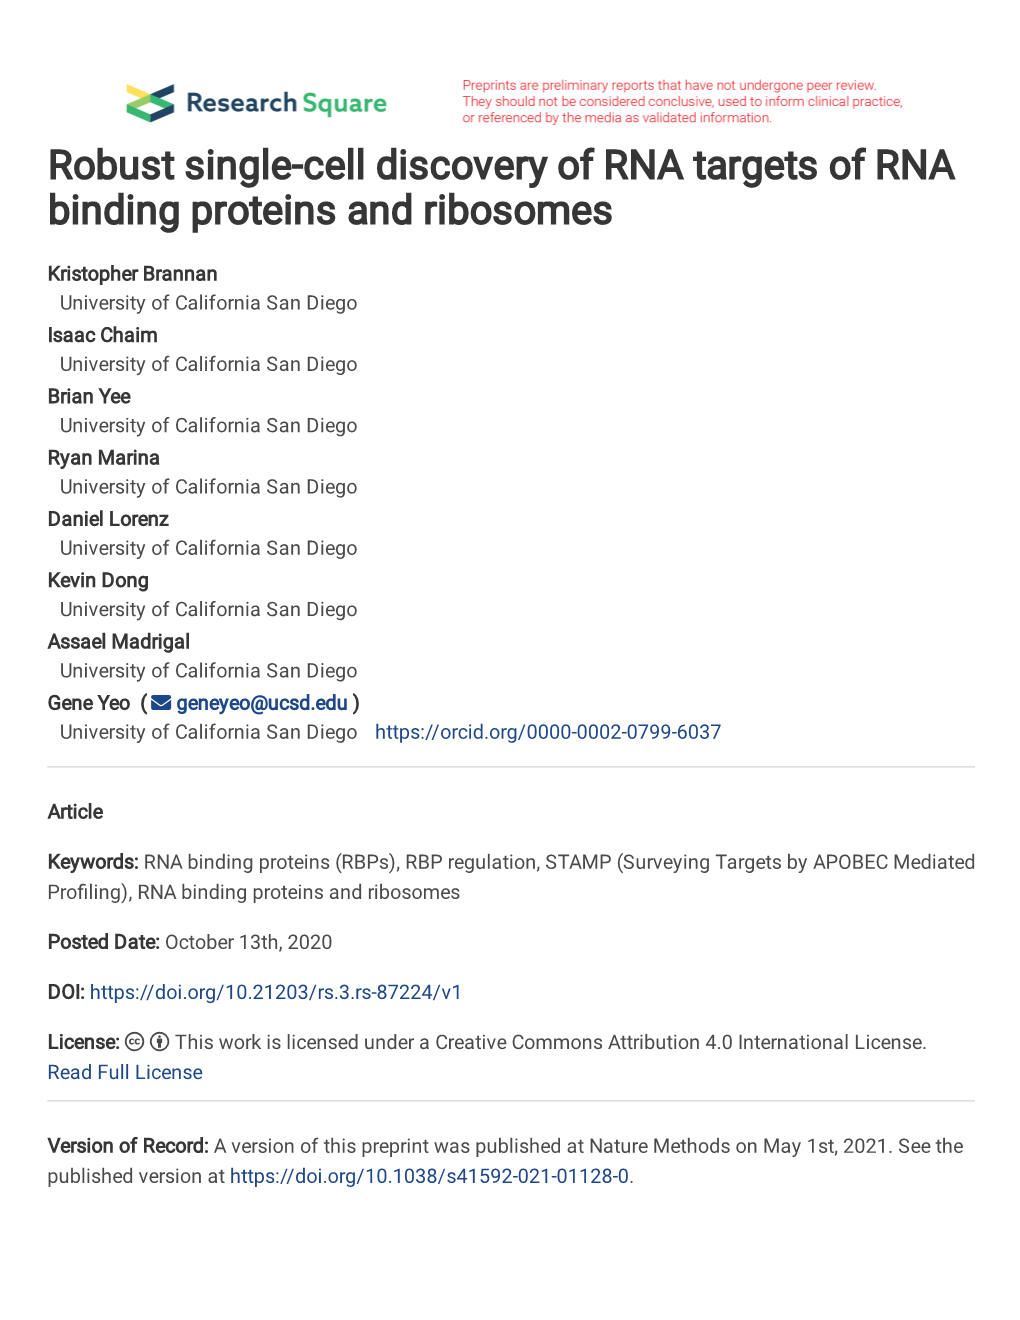 Robust Single-Cell Discovery of RNA Targets of RNA Binding Proteins and Ribosomes